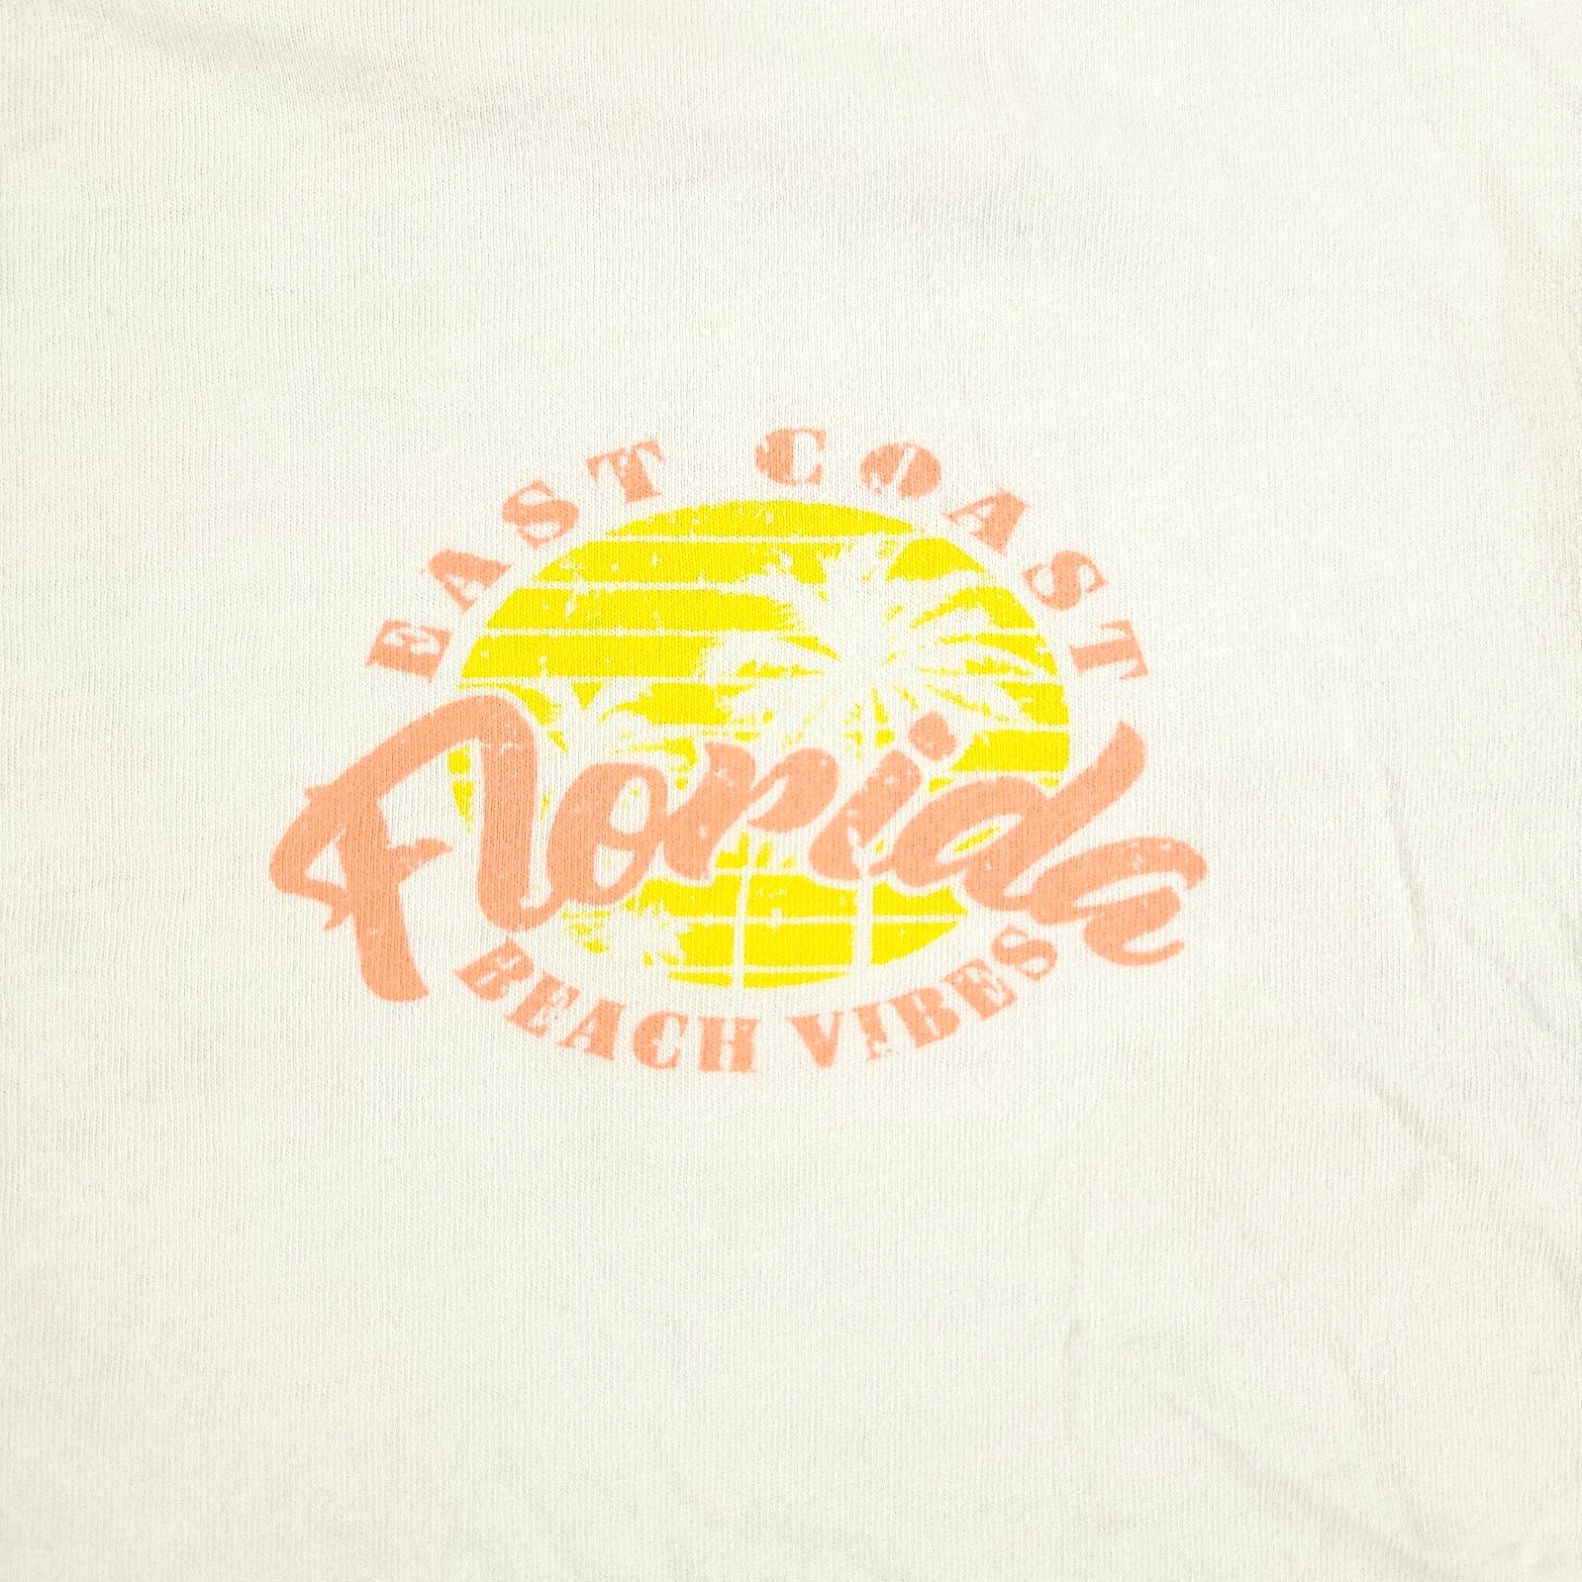 Vintage French Pastry Shirt Women Large White Florida Beach Graphic Tee Short Sleeve Top Size L / US 10 / IT 46 - 2 Preview